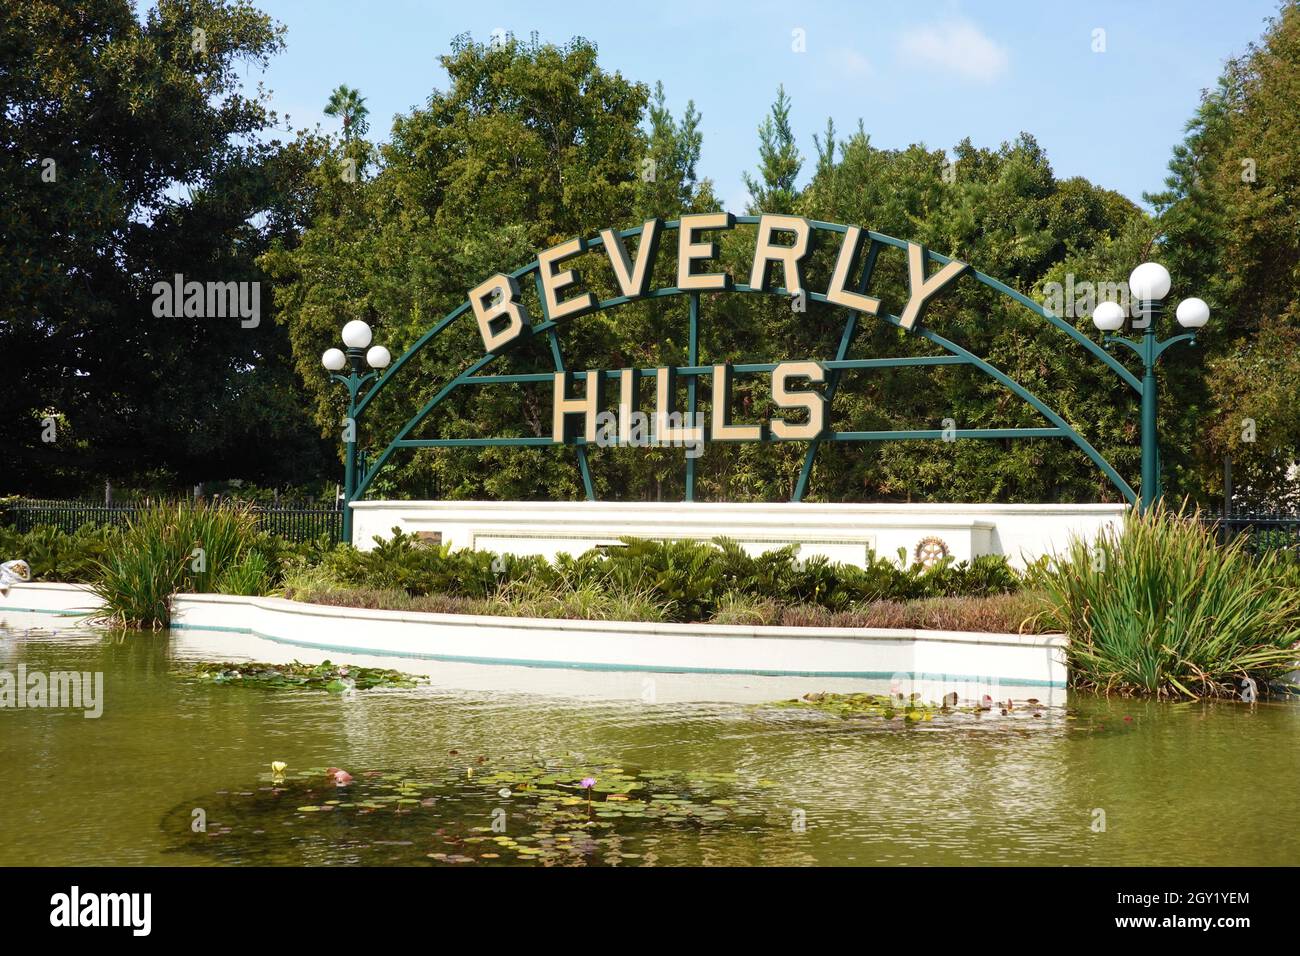 Famous Beverly Hills Sign, Beverly Hills, Los Angeles, California, United States of America, USA Stock Photo